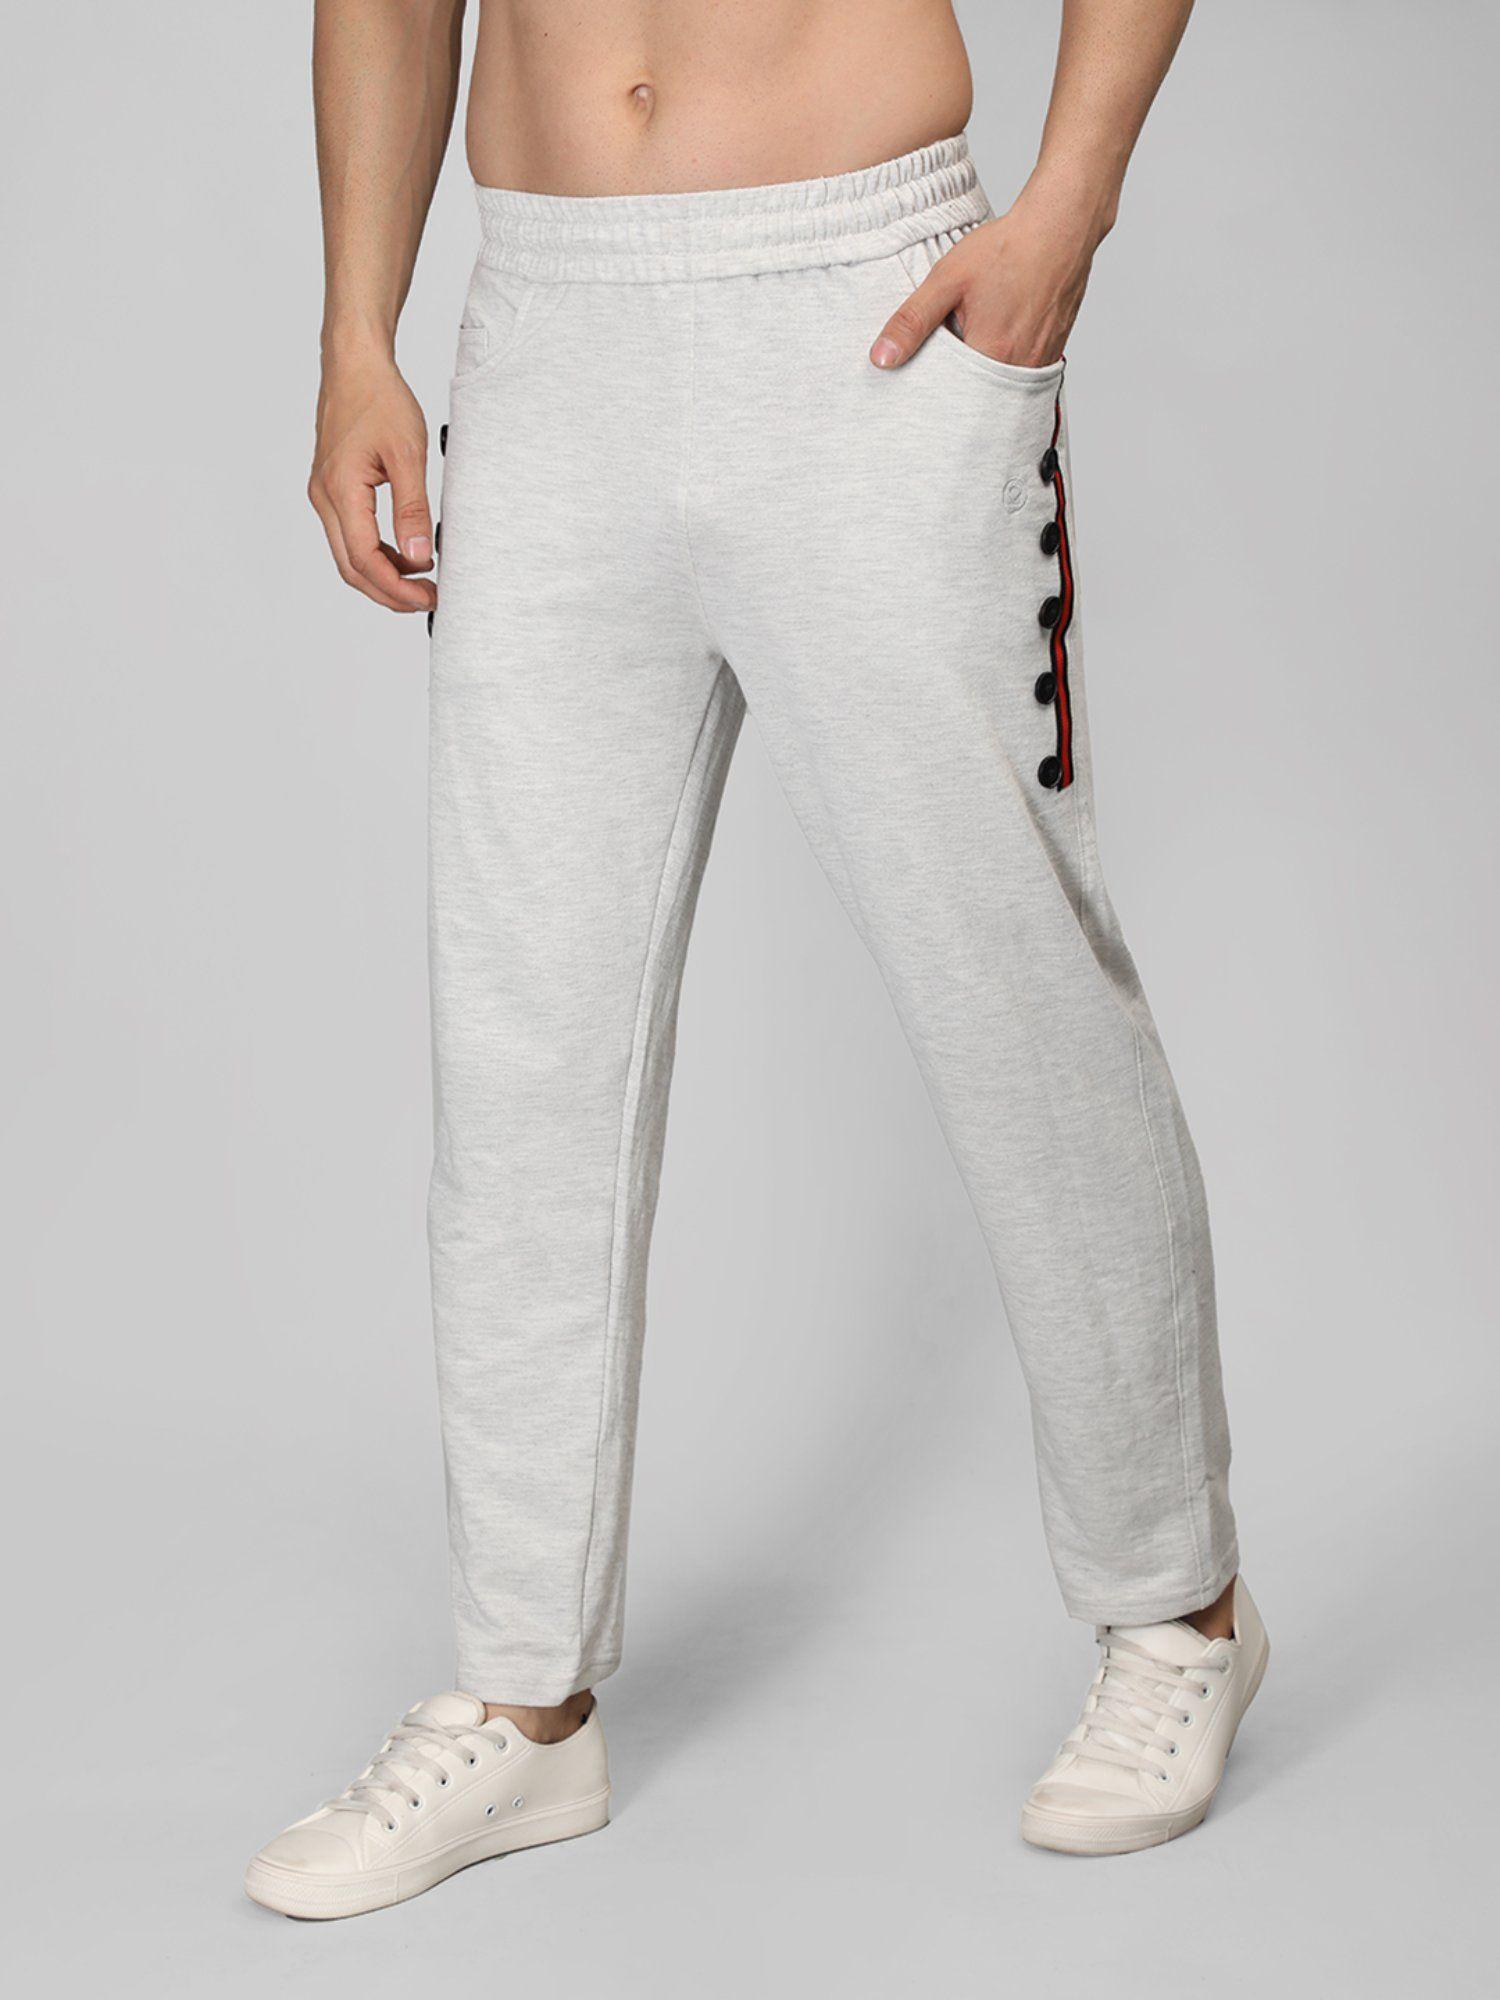 men casual lower track pants for workout